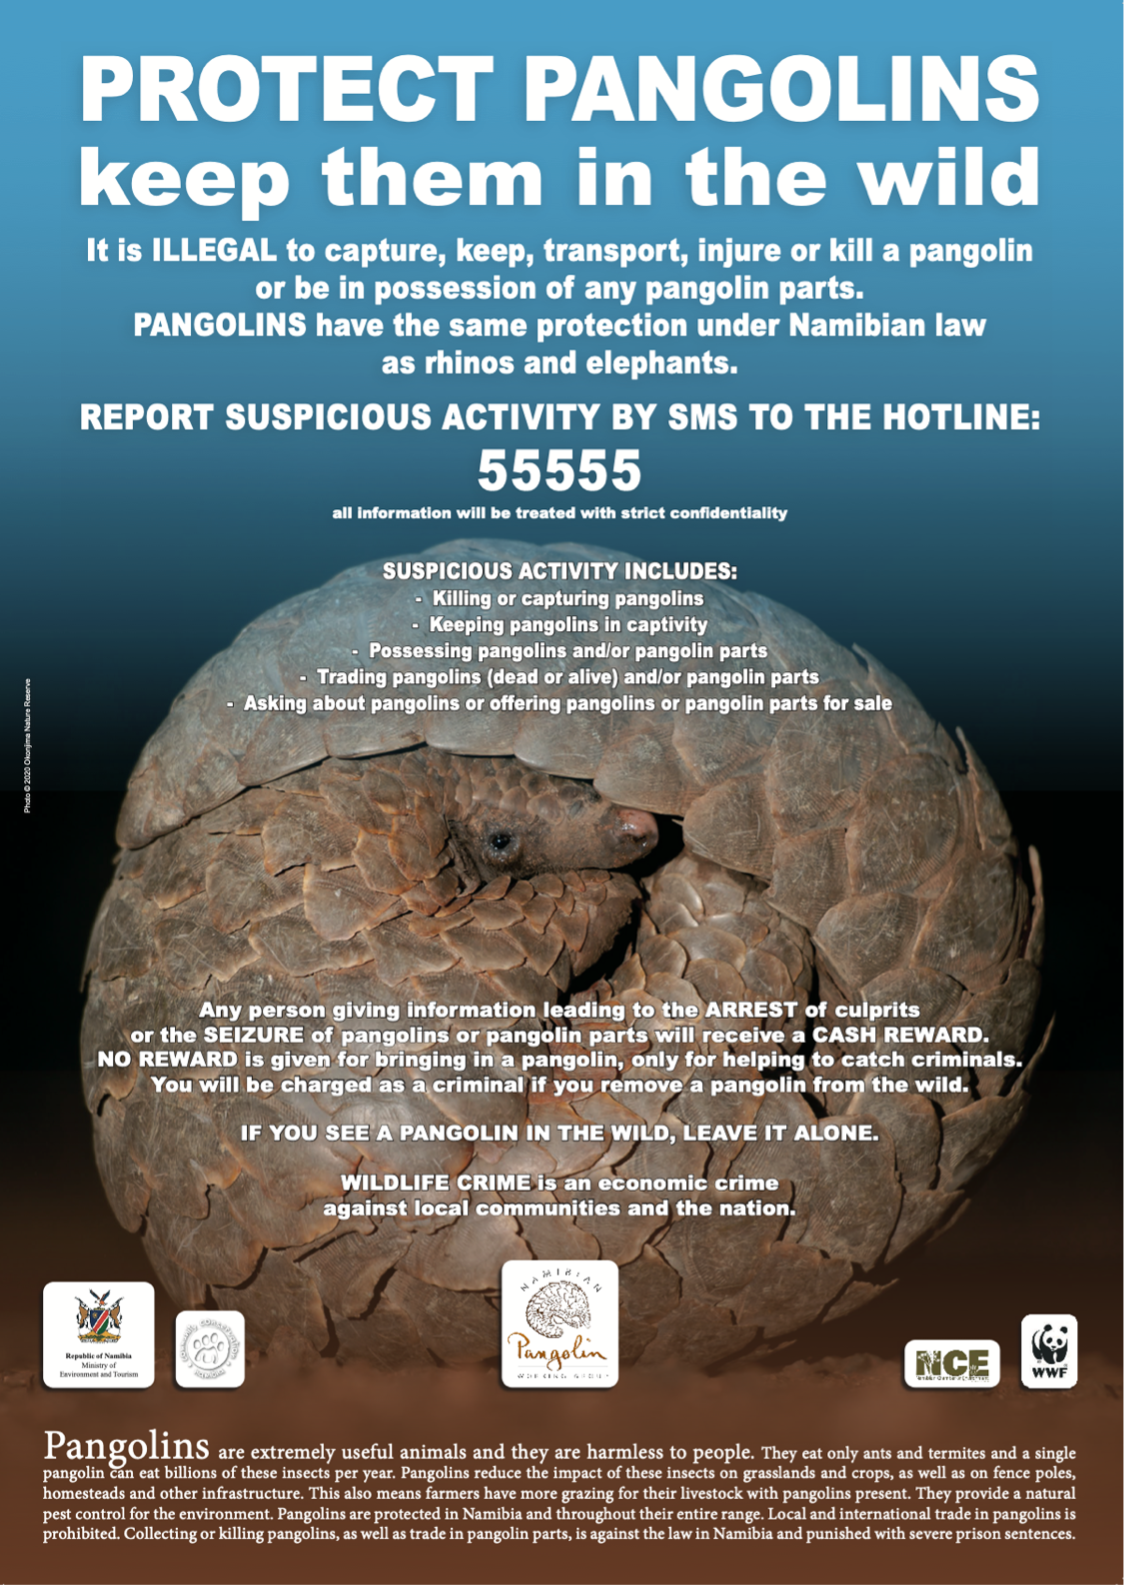 The reward poster for reporting illegal activities involving pangolins in Namibia. People with information should call 55555.